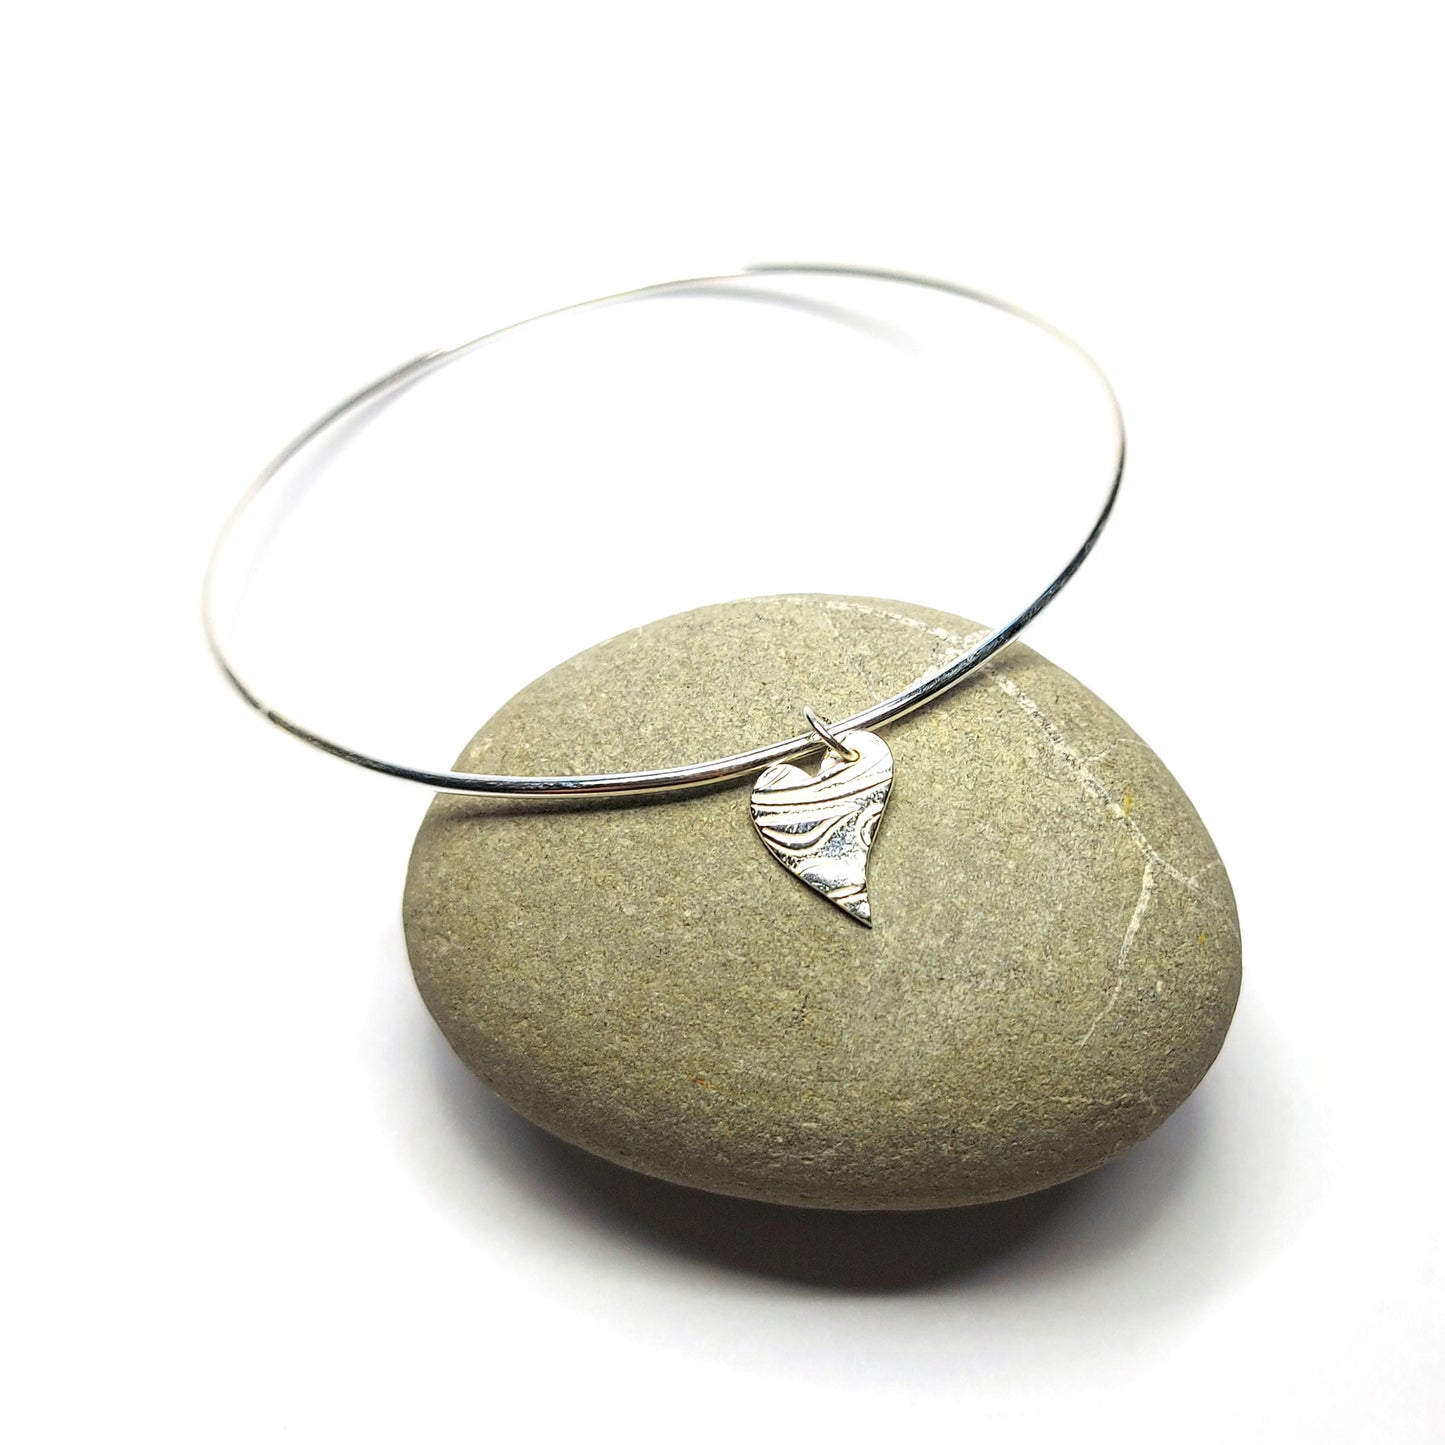 A round silver bangle with an asymmetrical patterned heart charm. Pictured on a pebble.